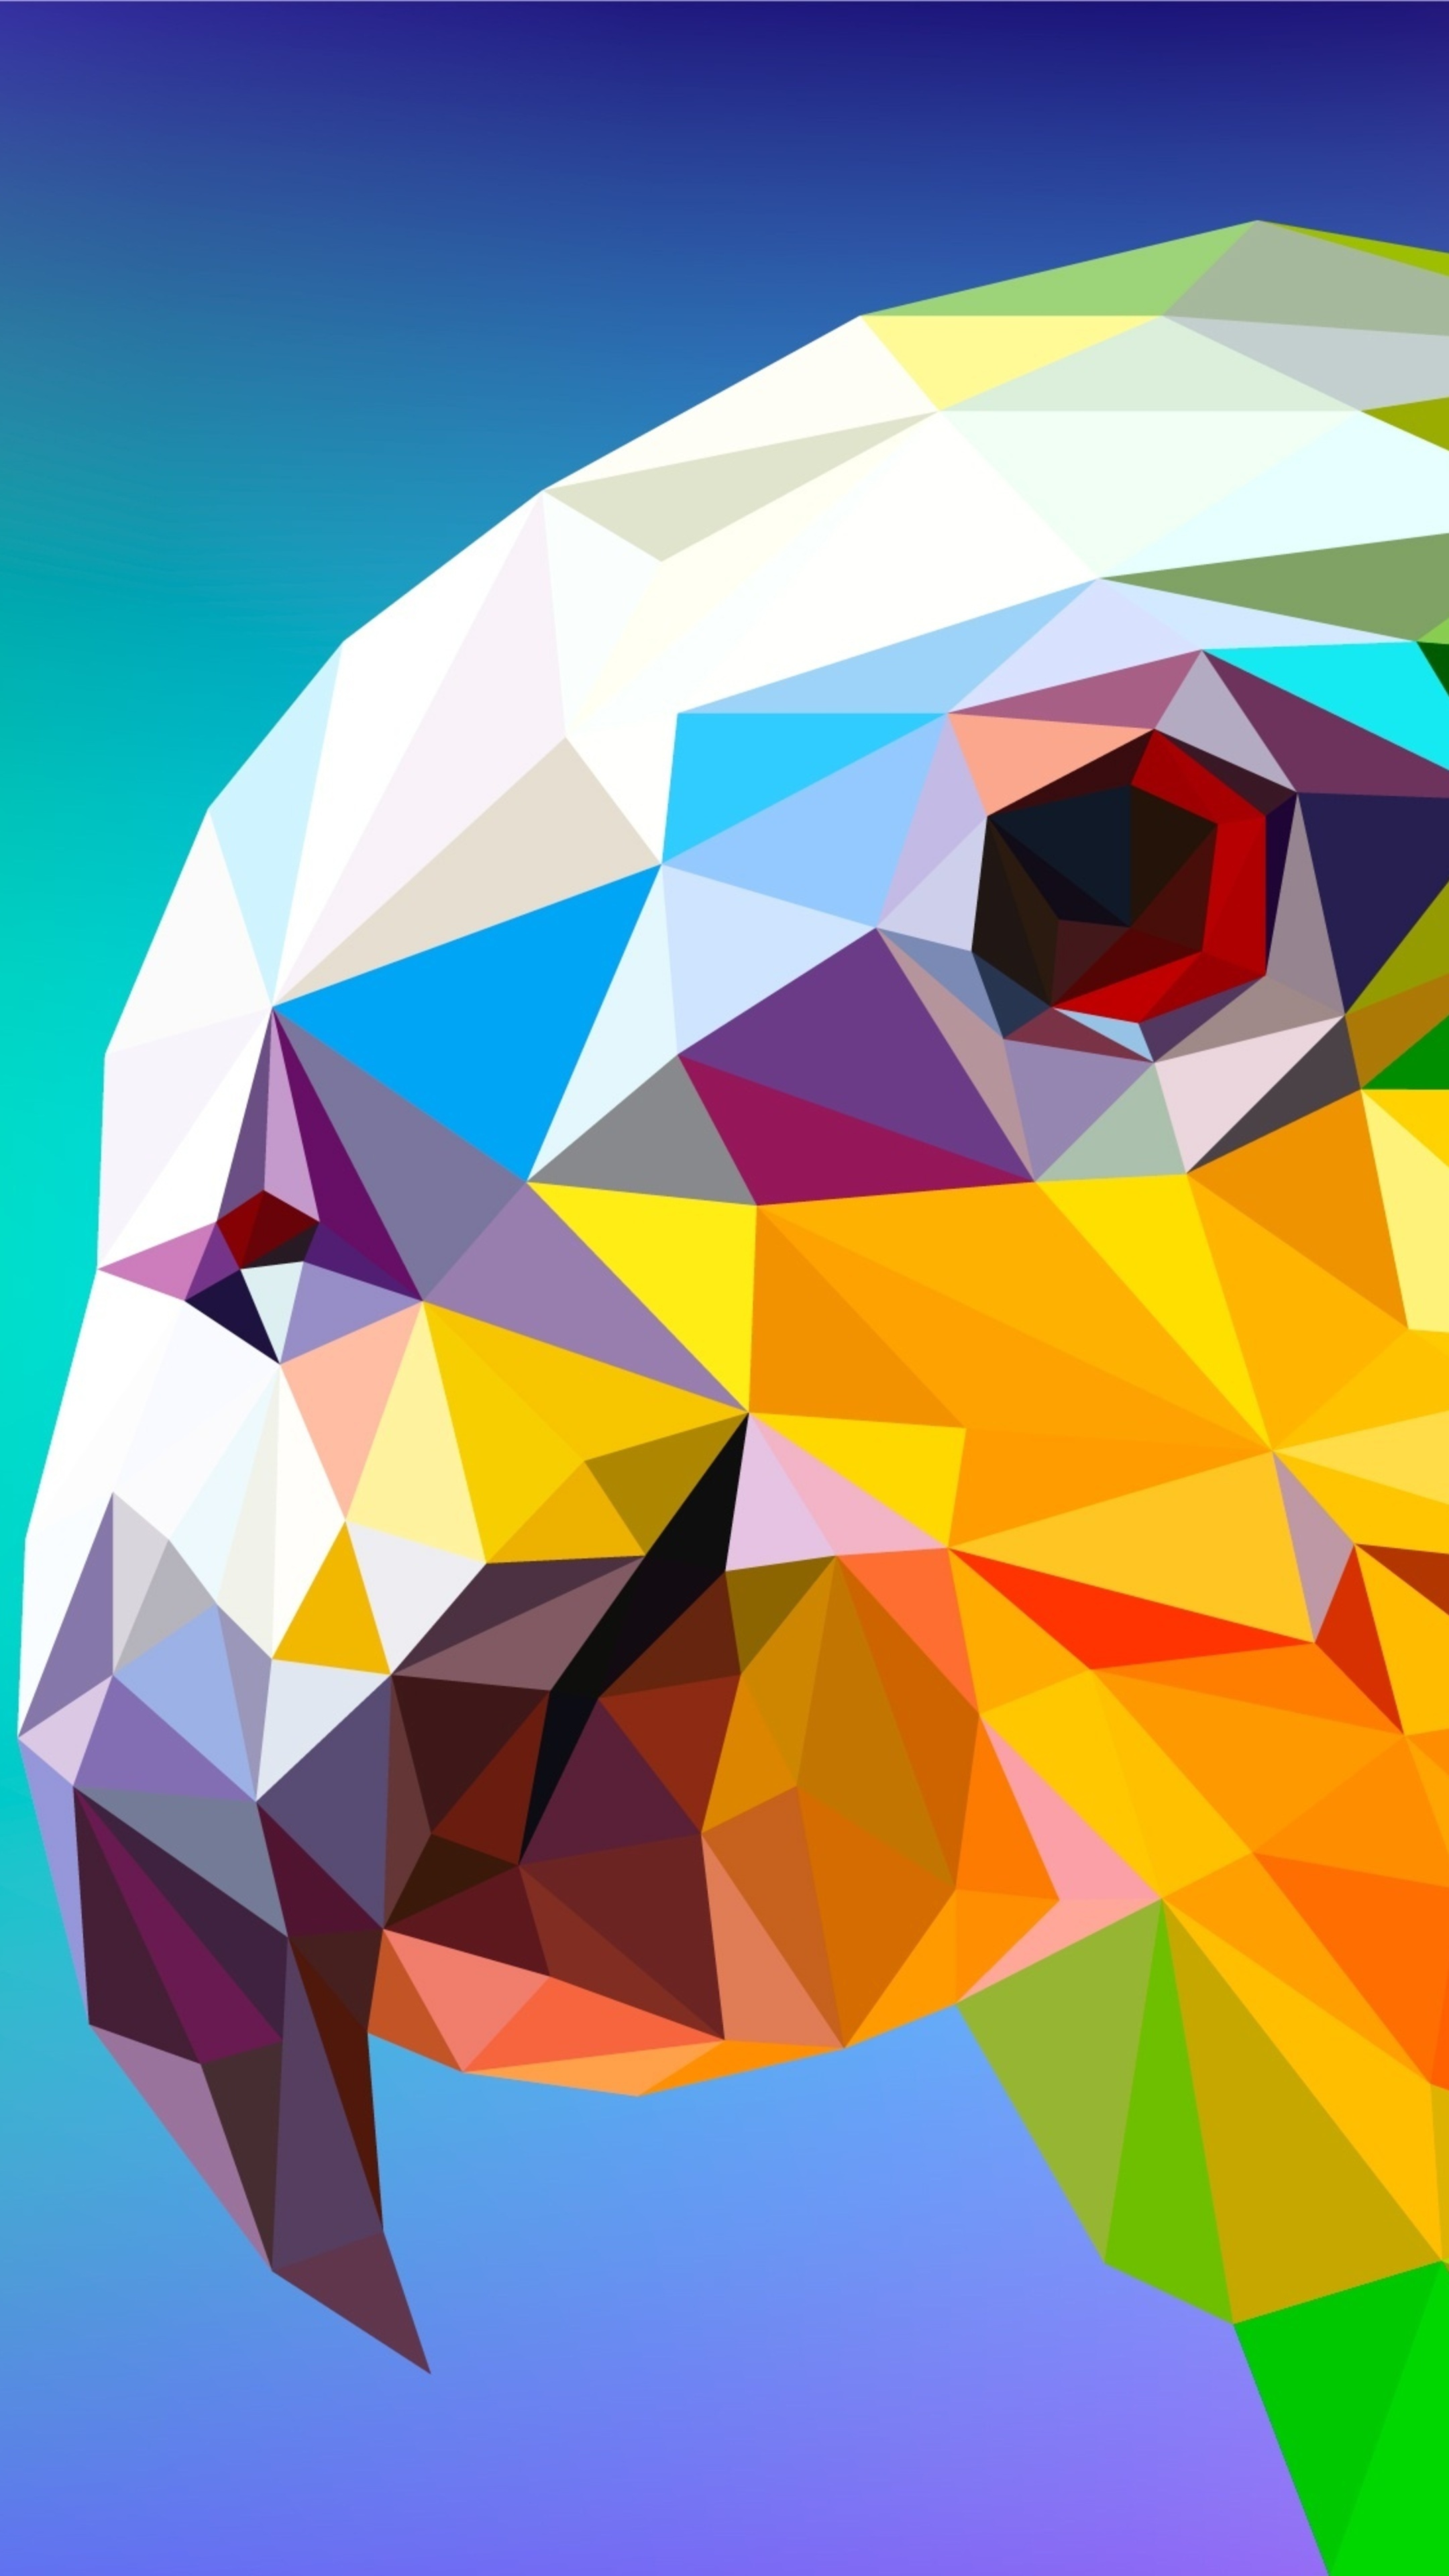 Parrot polygon facets, Sony Xperia wallpapers, Premium HD 4K, Striking bird imagery, 2160x3840 4K Handy